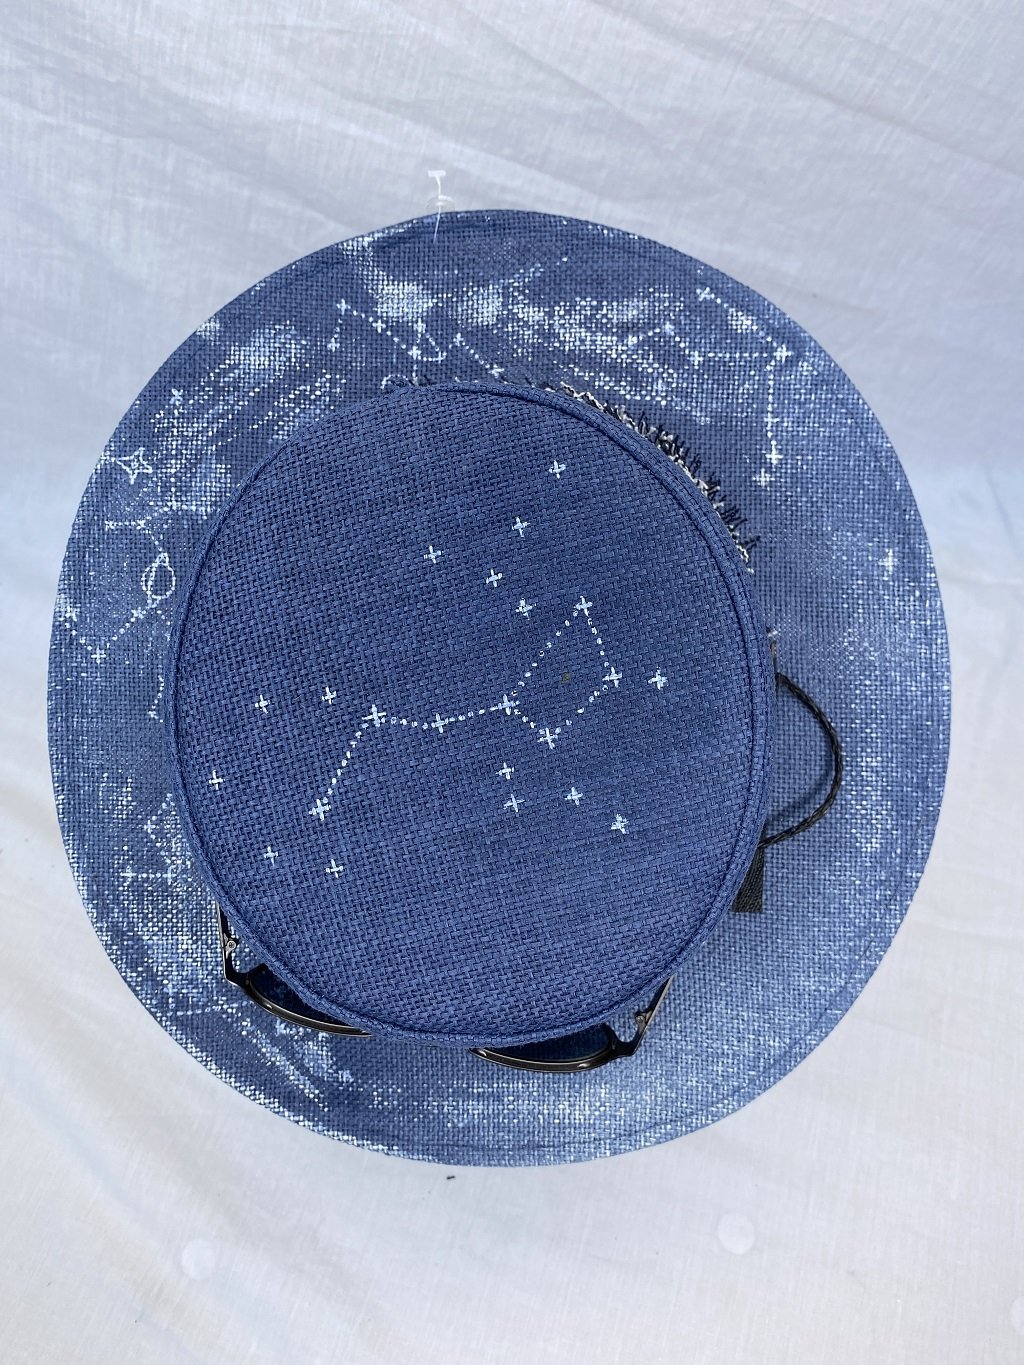 Customized Hat "Constellation", Author Design, Handmade, With Glasses.